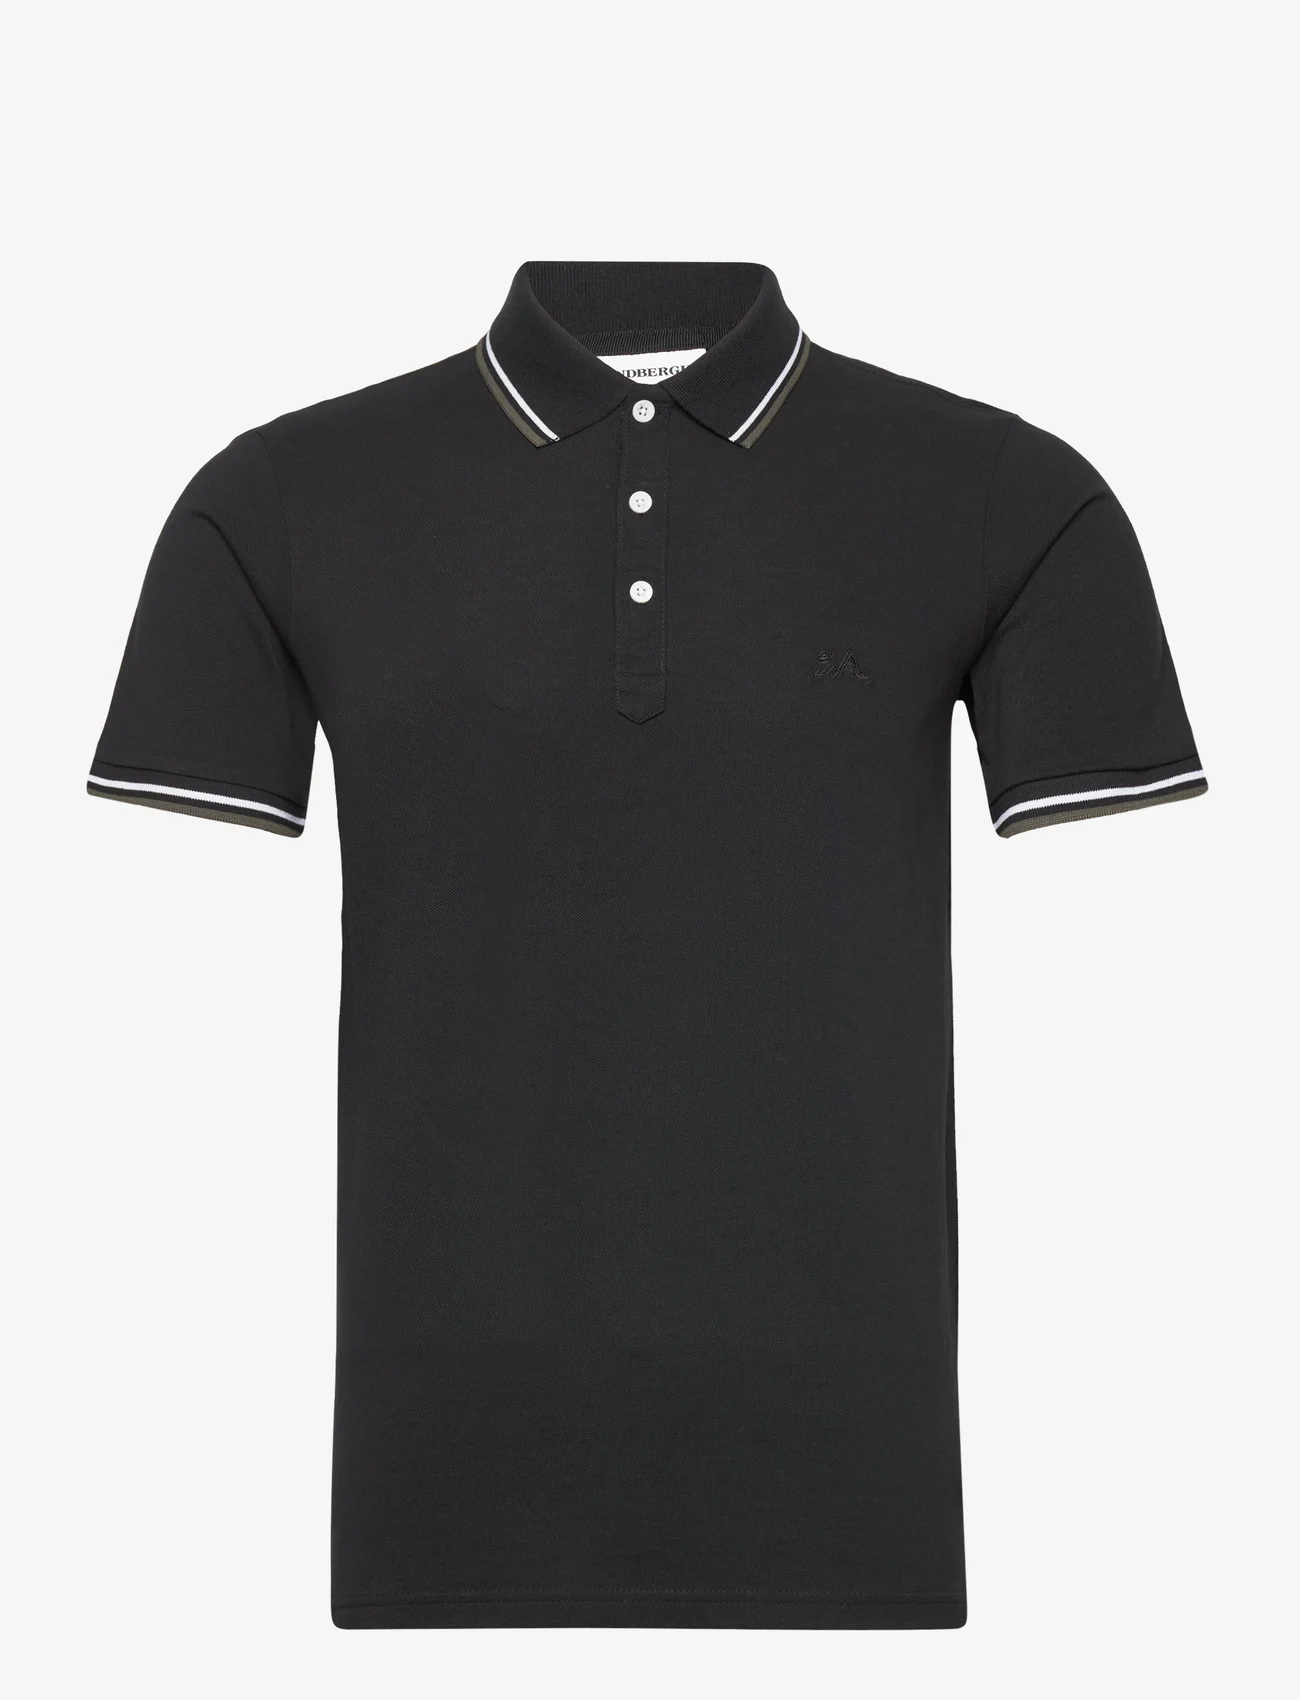 Lindbergh - Polo shirt with contrast piping - lowest prices - black 124 - 0